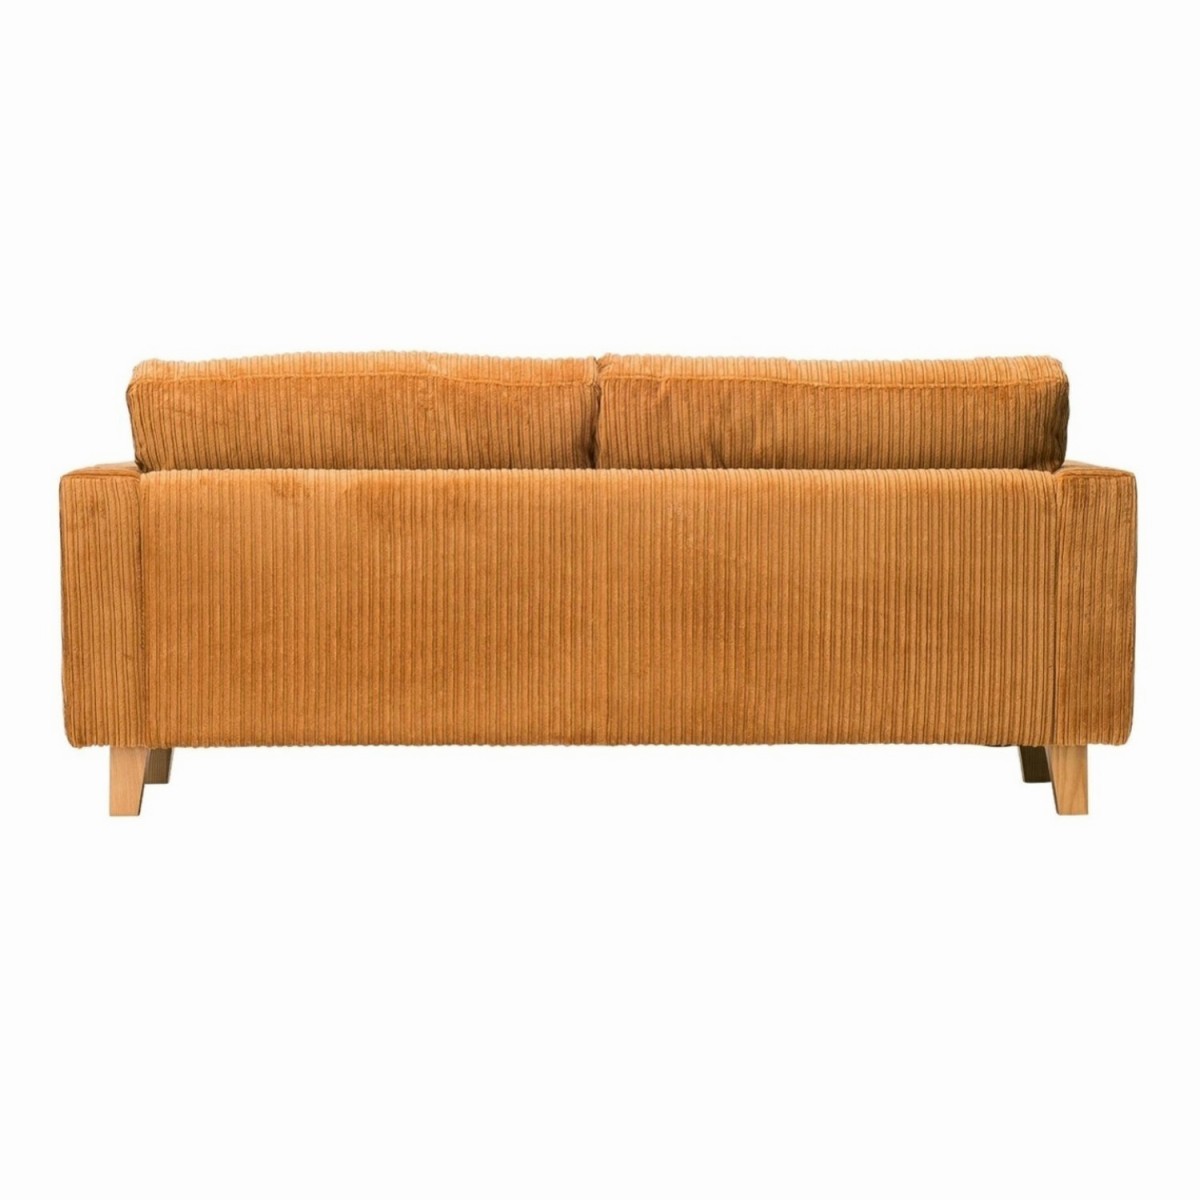 ACME Furniture アクメファニチャー JETTY feather SOFA 2P(L 